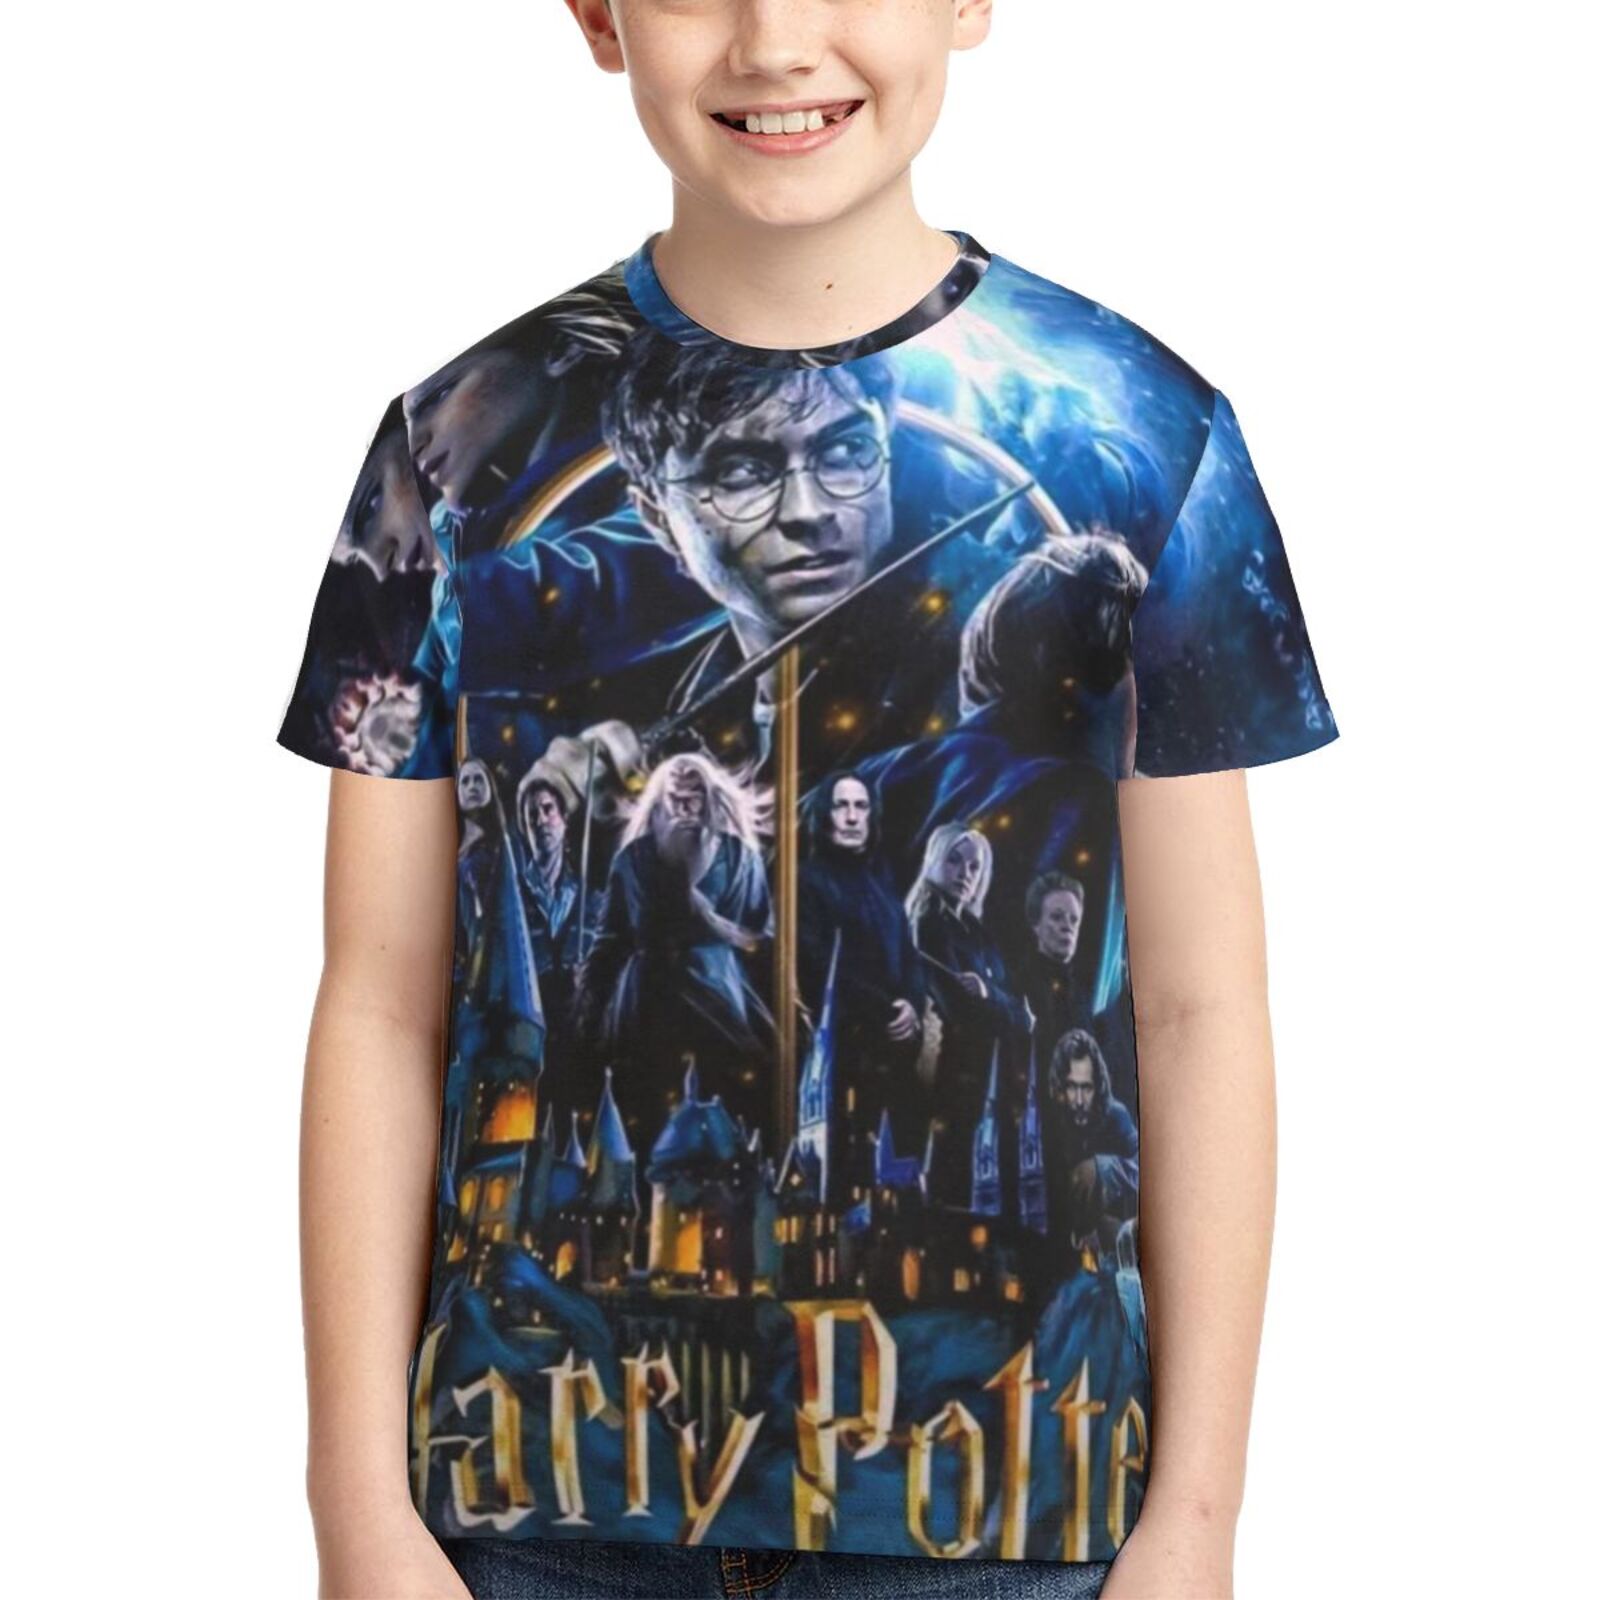 Harry Potter Youth T Shirts 3d Printed Short Sleeve Tee Shirt For Boys ...